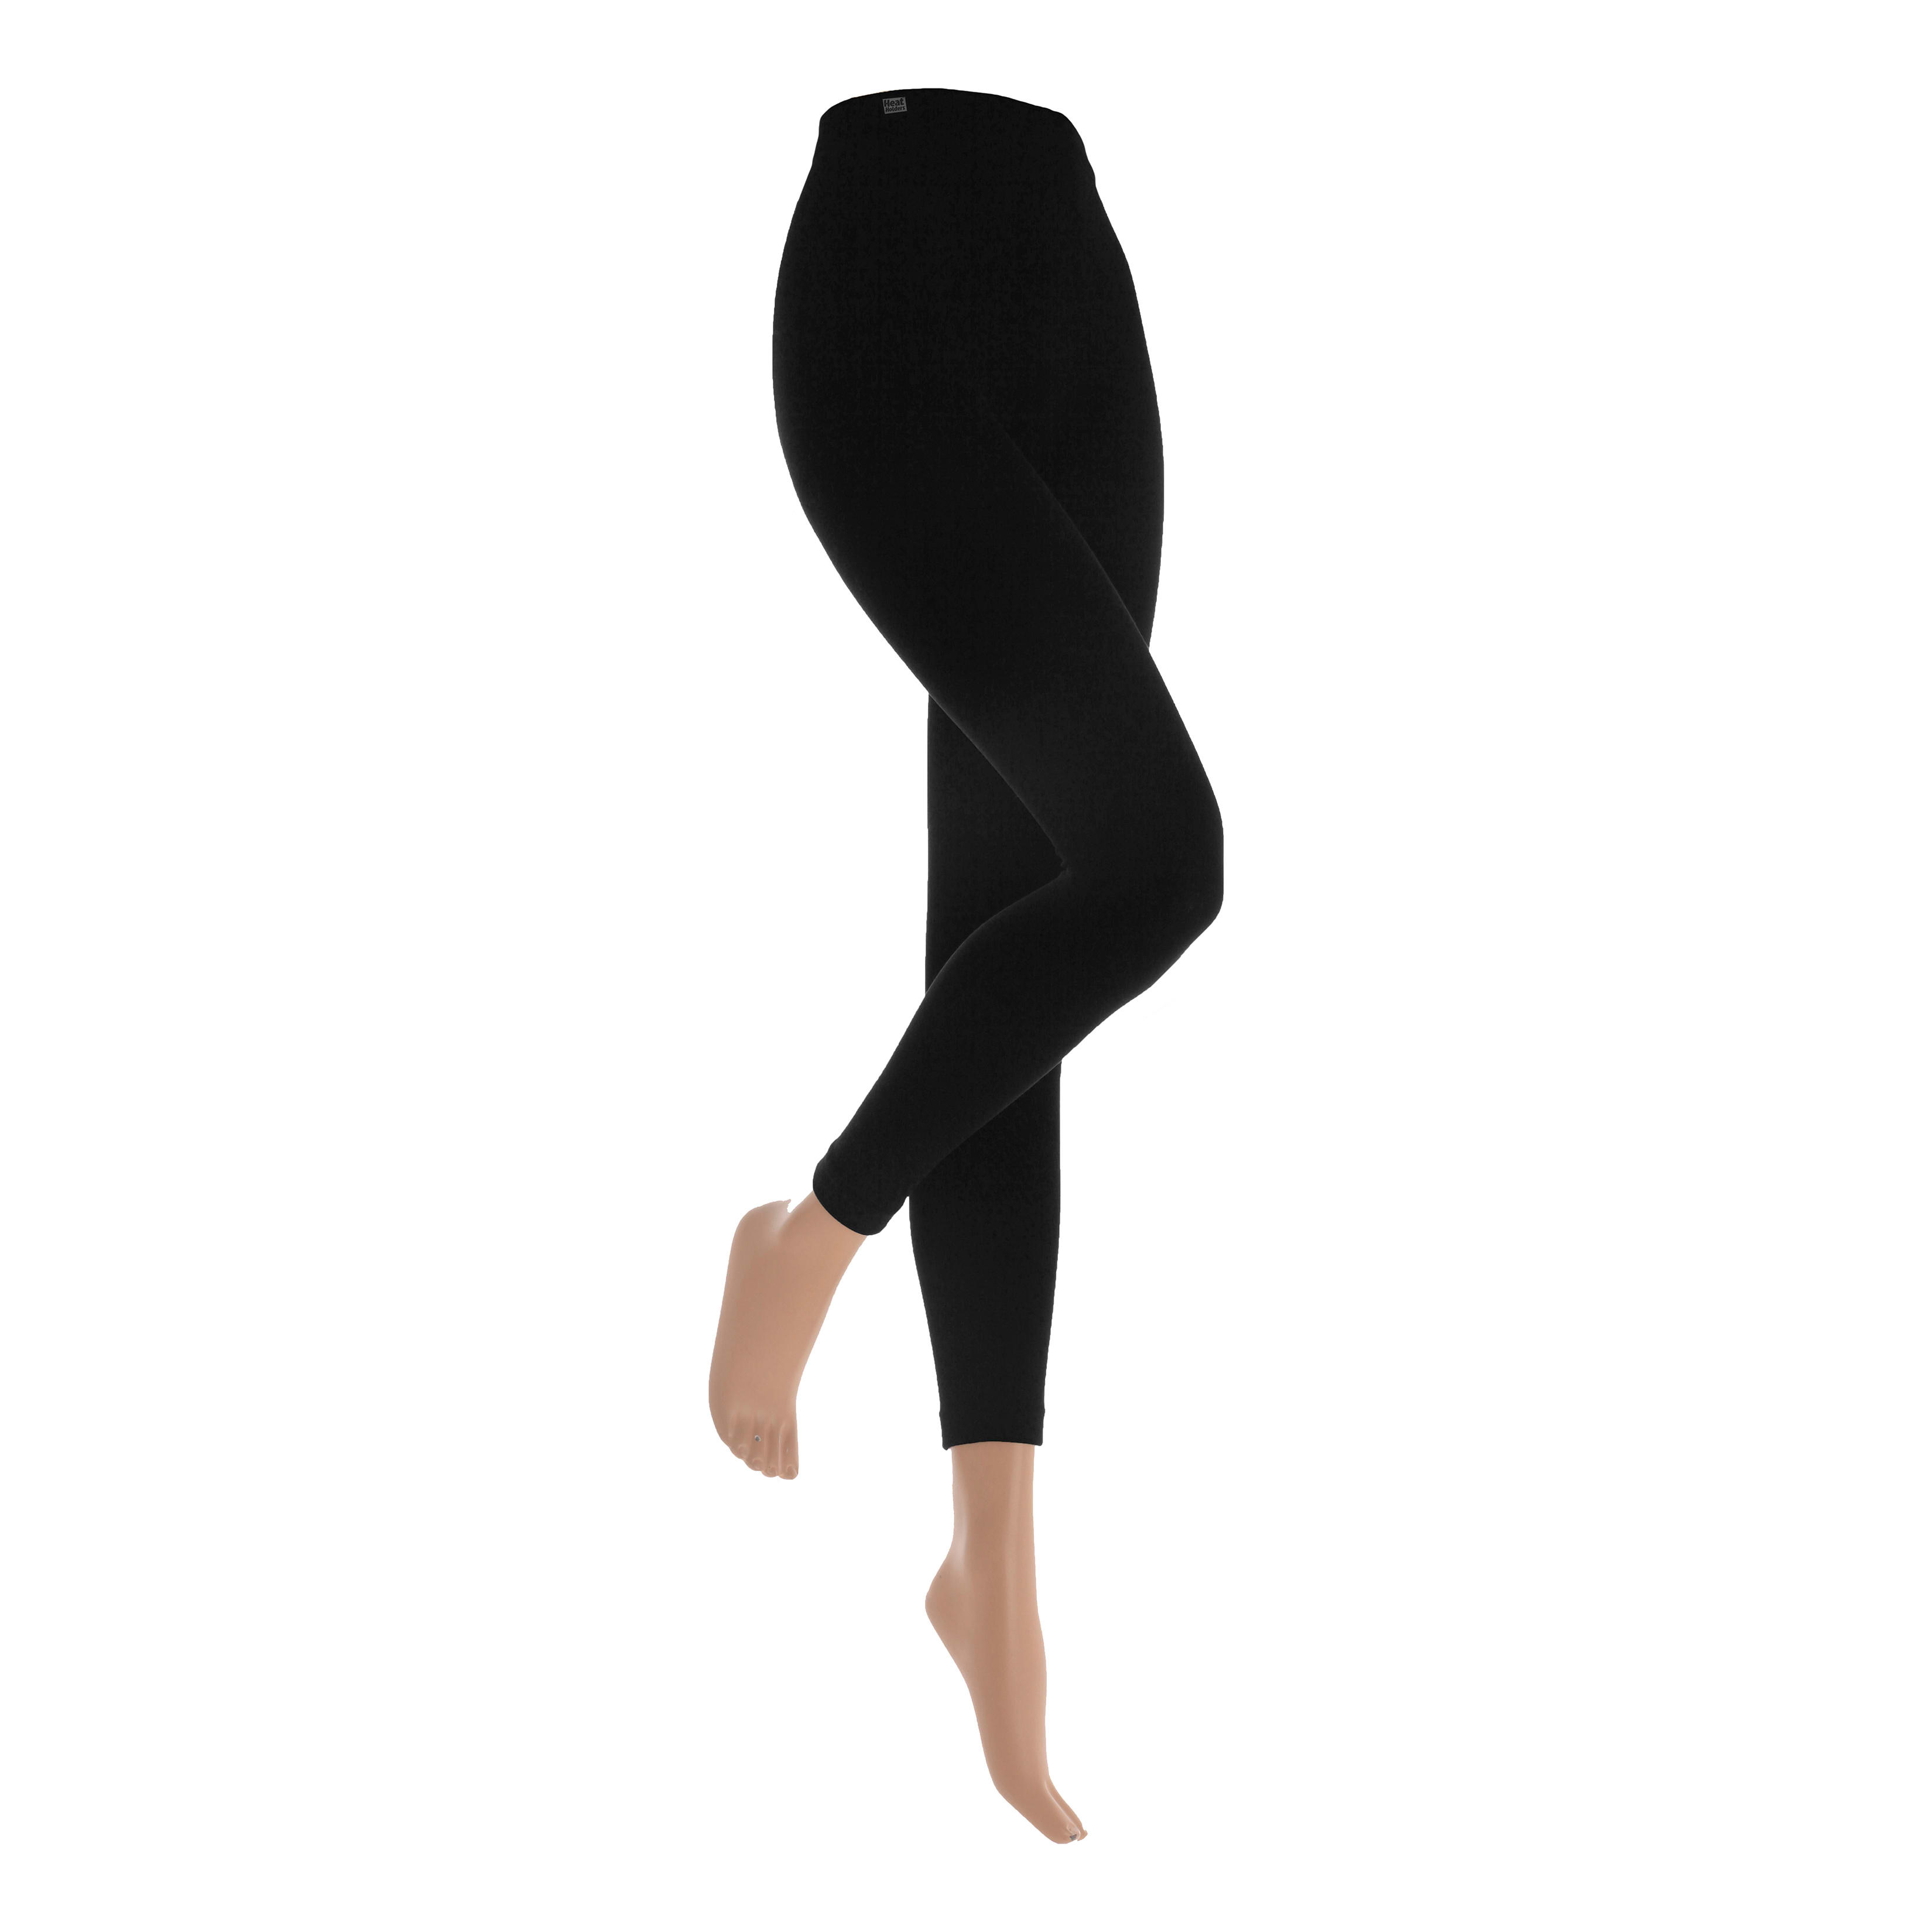 Women's Footless Tights  Footless tights, Thermal tights, Women wearing  ties